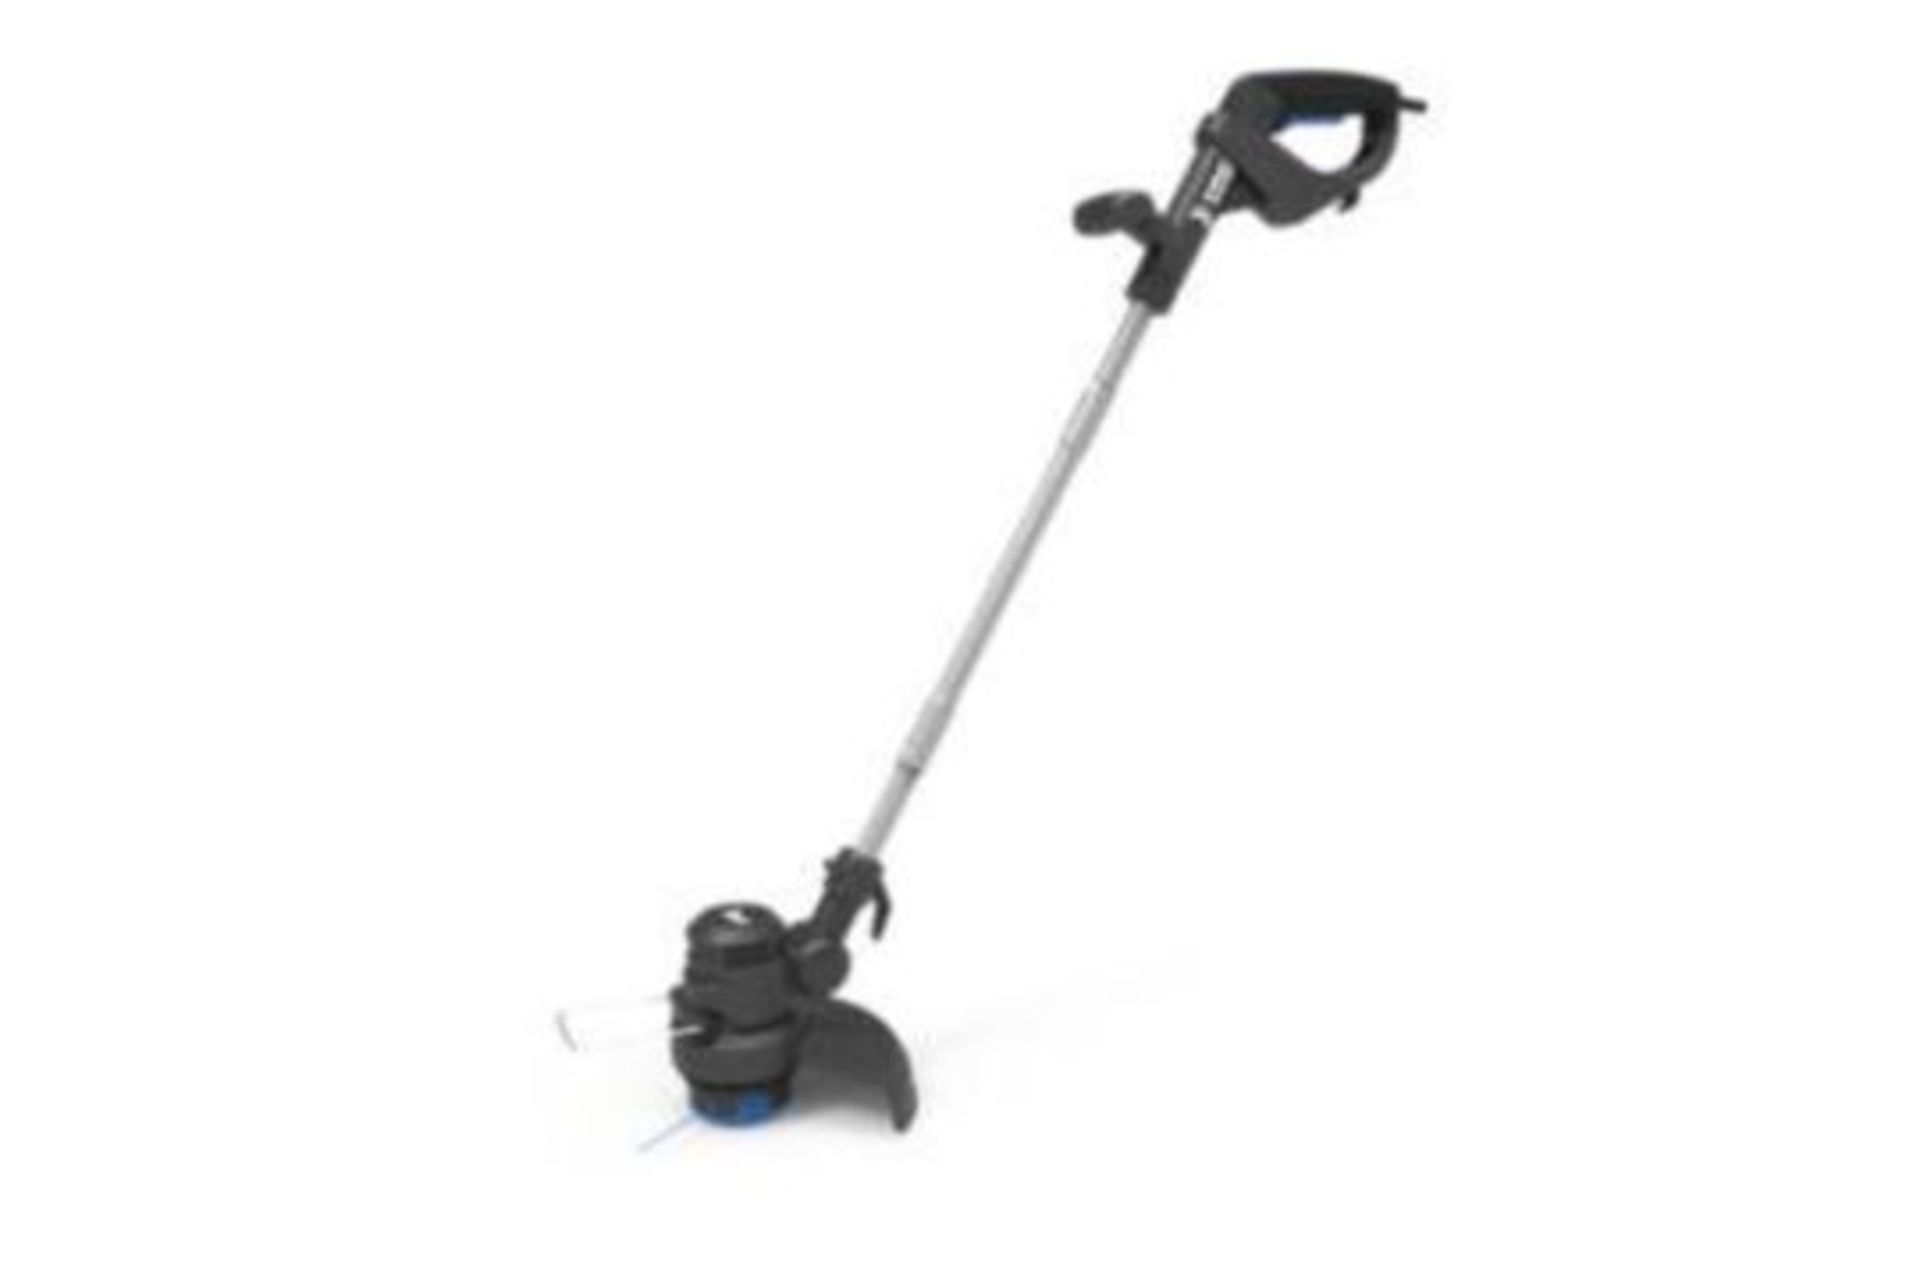 Mac Allister Mgt35025 350W Corded Grass Trimmer - (R51) This corded grass trimmer is perfect for